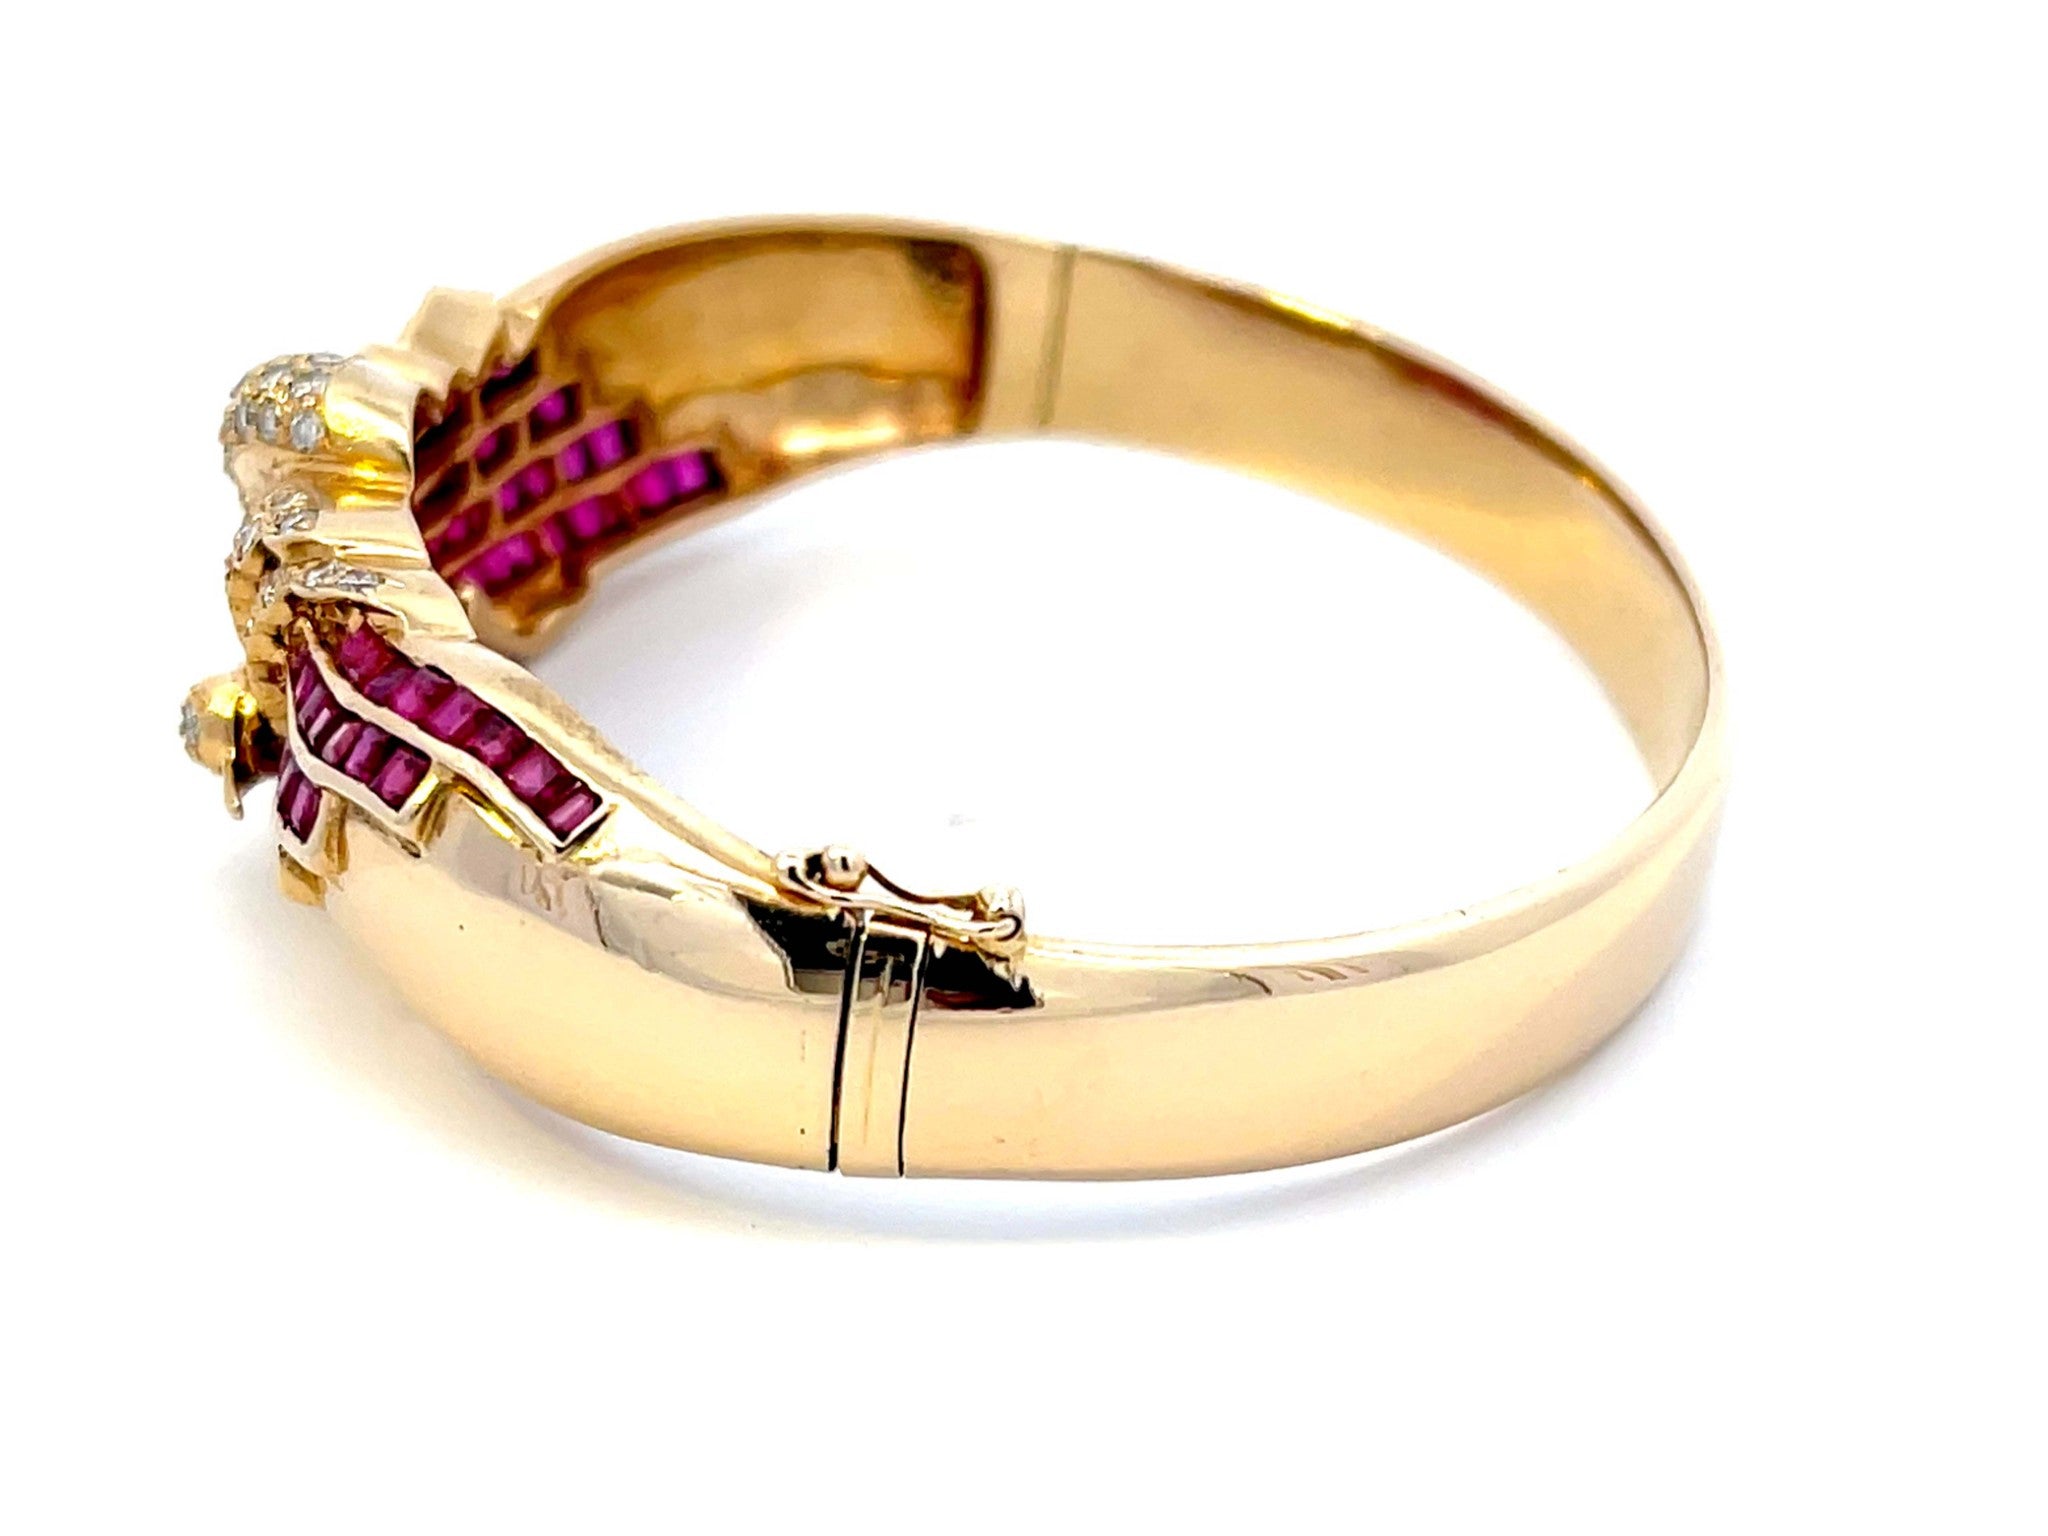 Diamond Swan and Ruby Bangle in 14k Yellow Gold